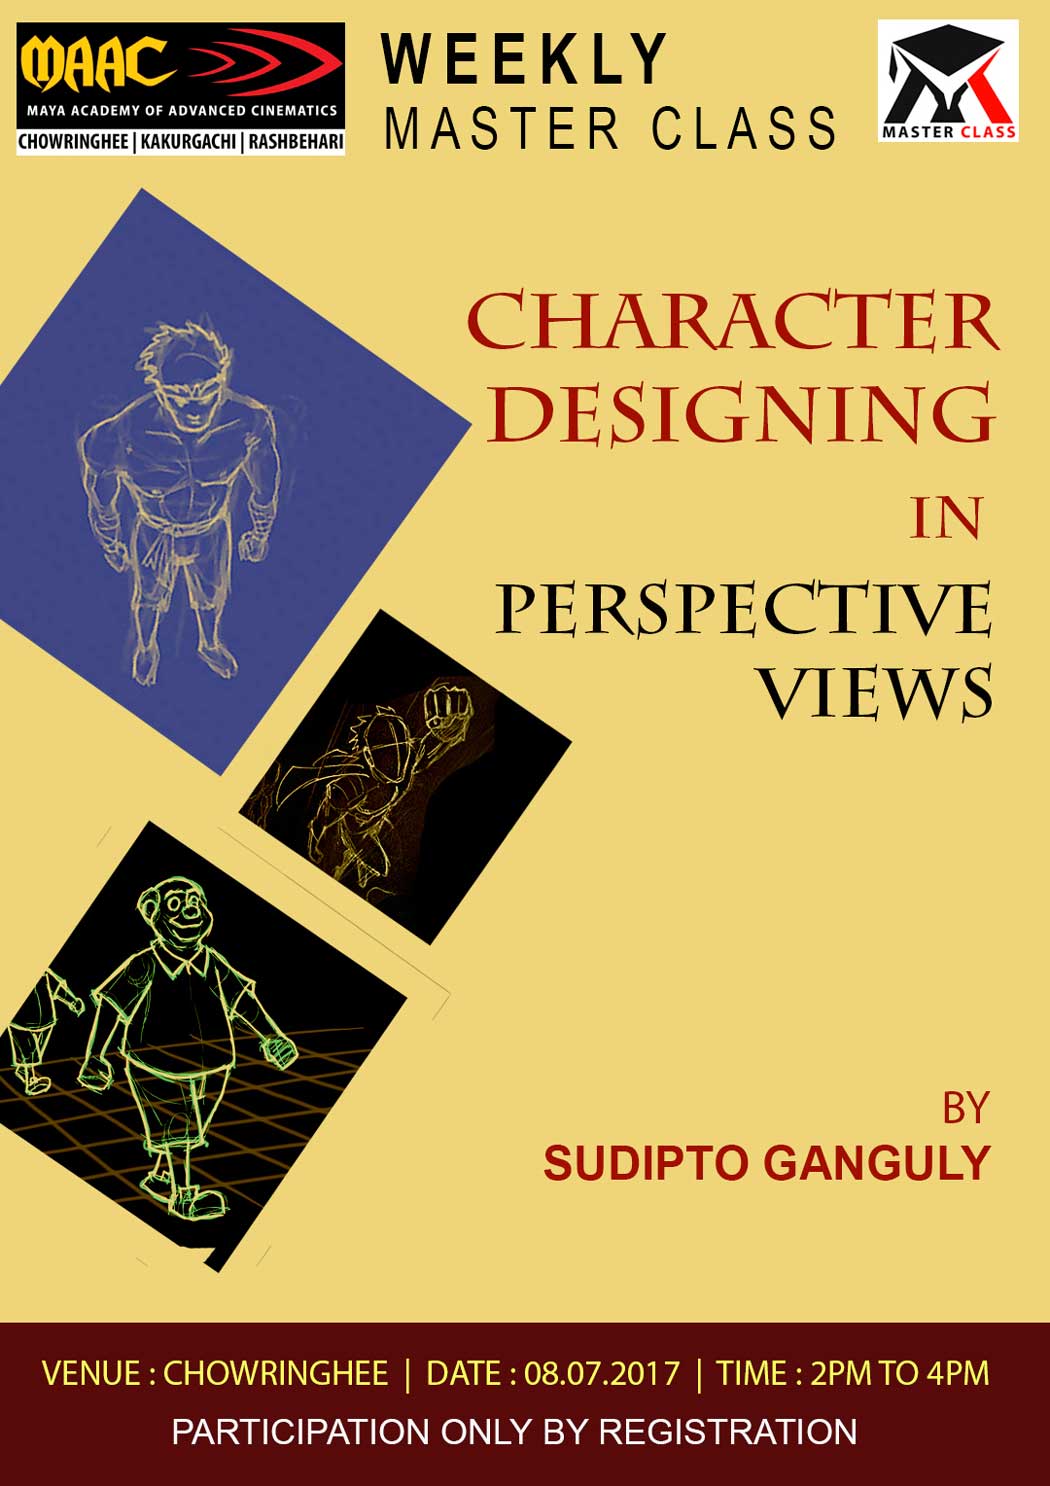 Weekly Master Class on Character Designing in Perspective Views - Sudipta Ganguly